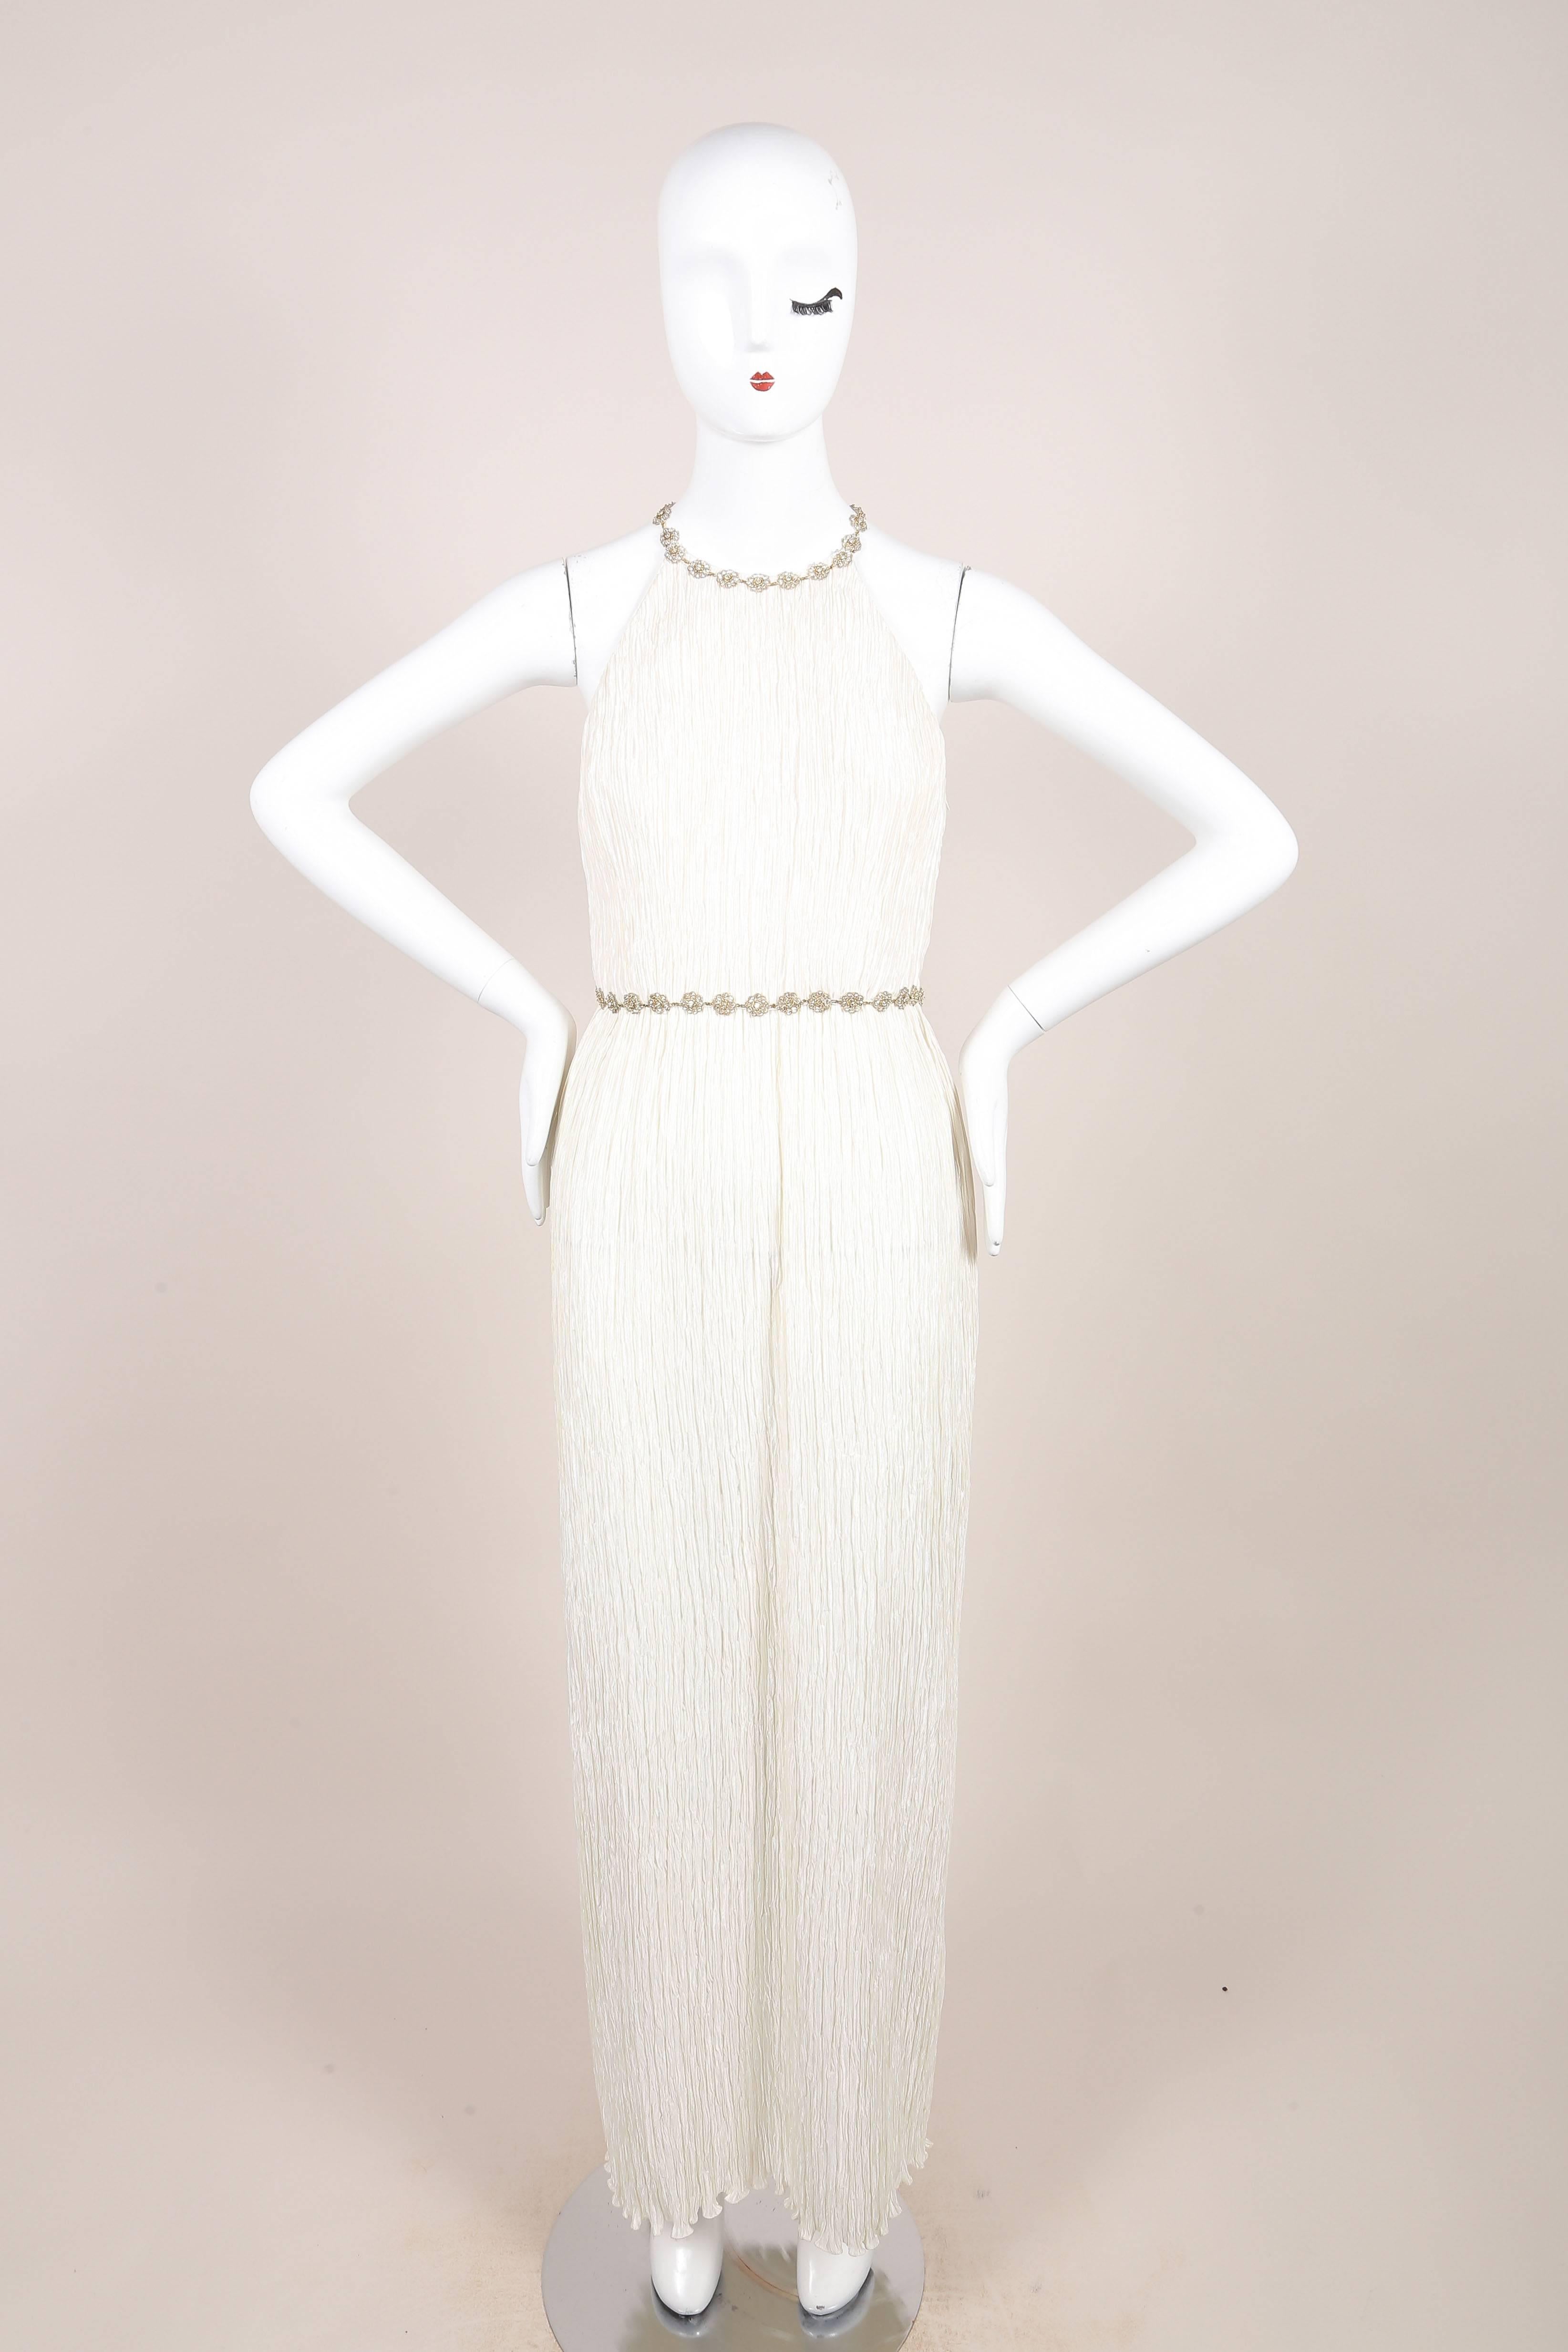 This sleeveless embellished gown comes with a matching shawl. Crinkled ivory fabric. High, rounded neckline. Floor length hemline. Metallic gold and silver, sequin embellished/beaded straps at shoulders at upper back.
Metallic gold and silver,